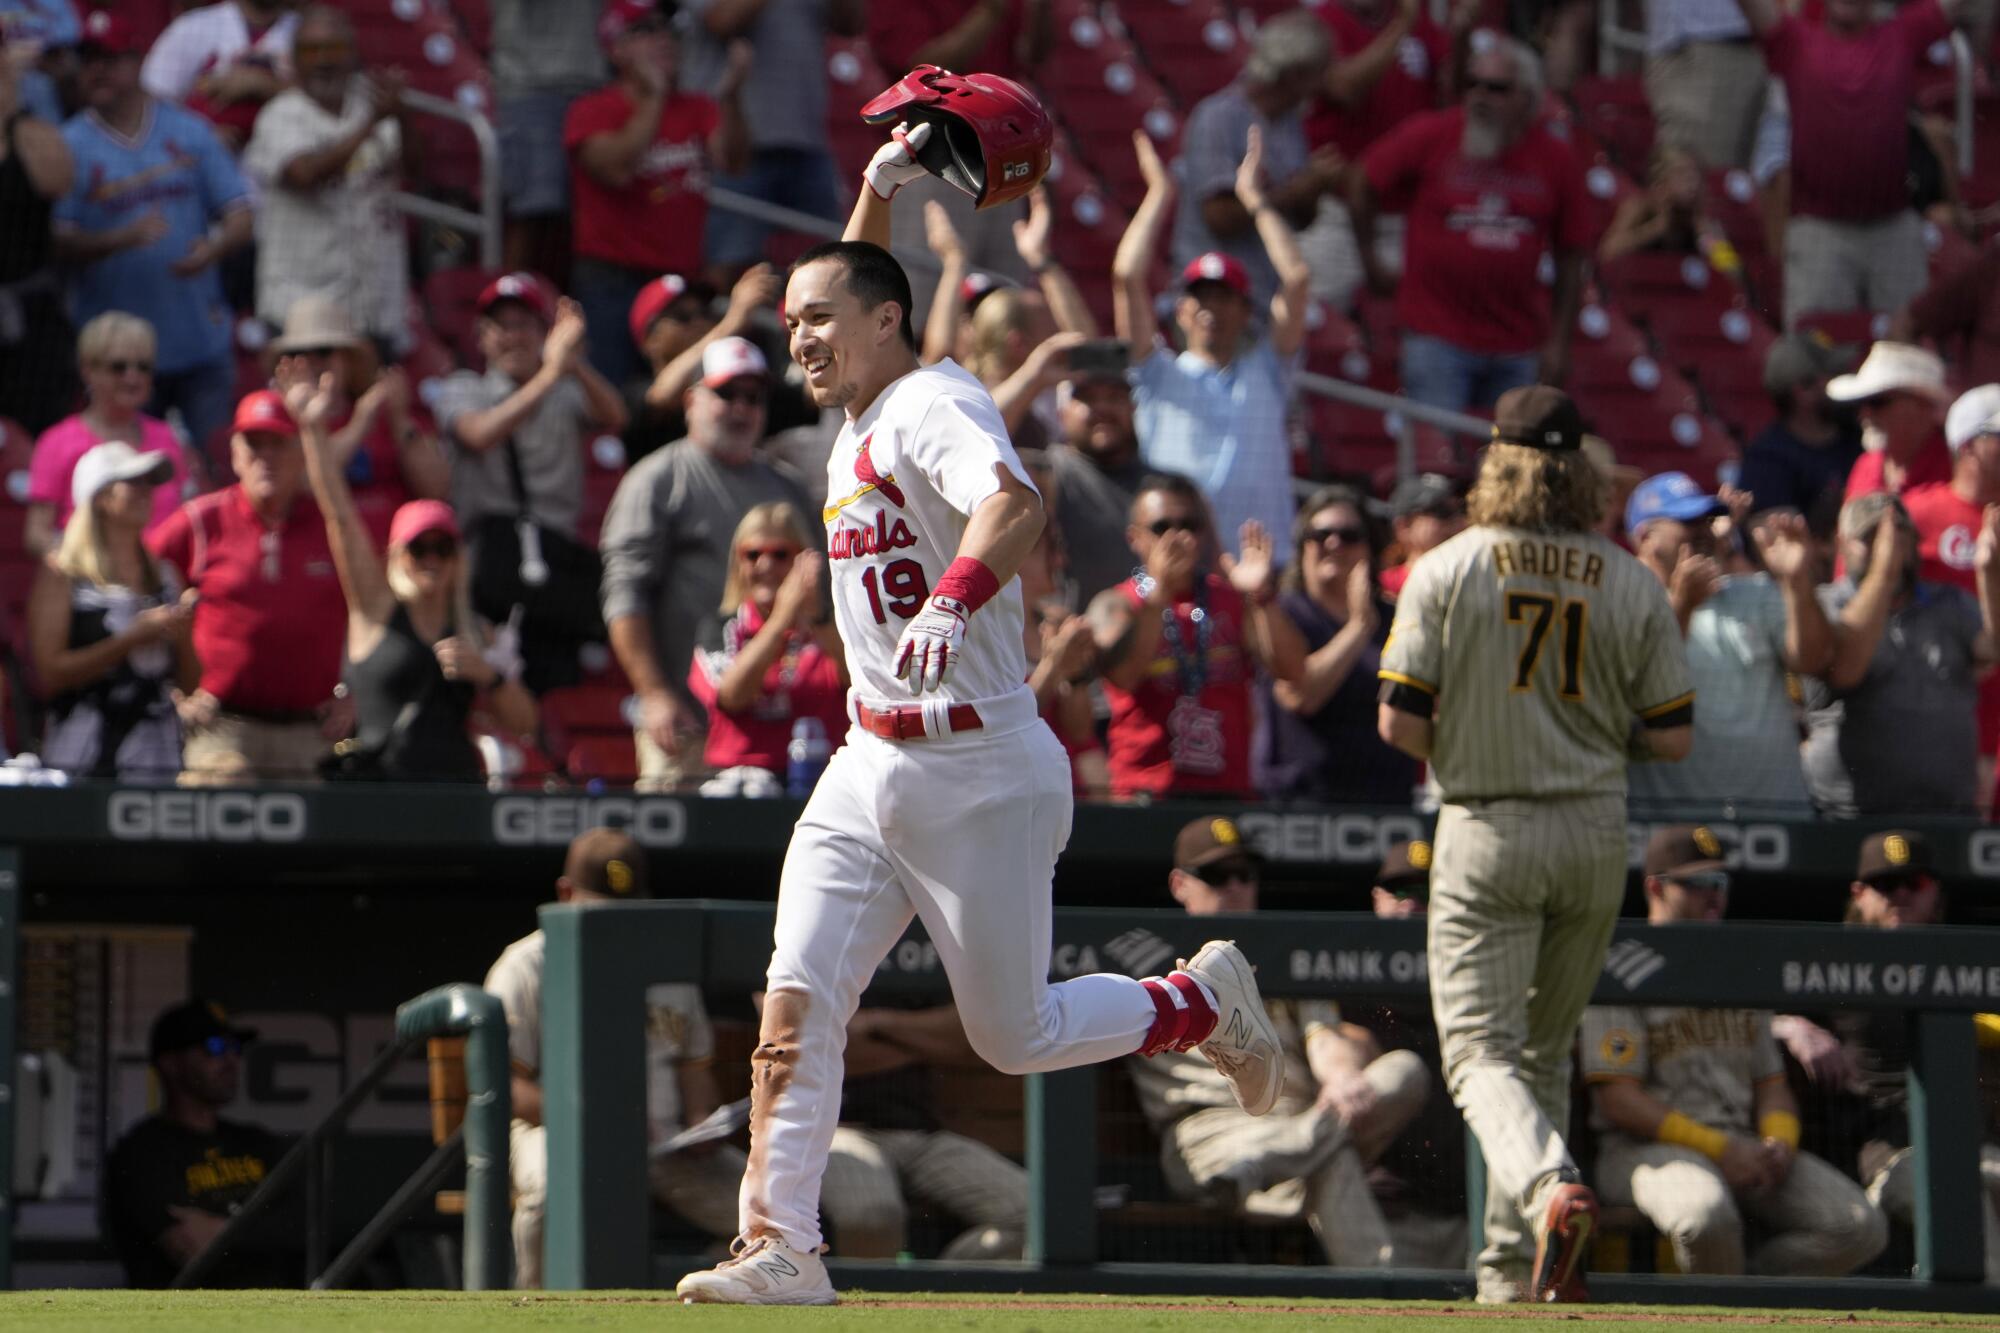 Cardinals' Road to Opening Day